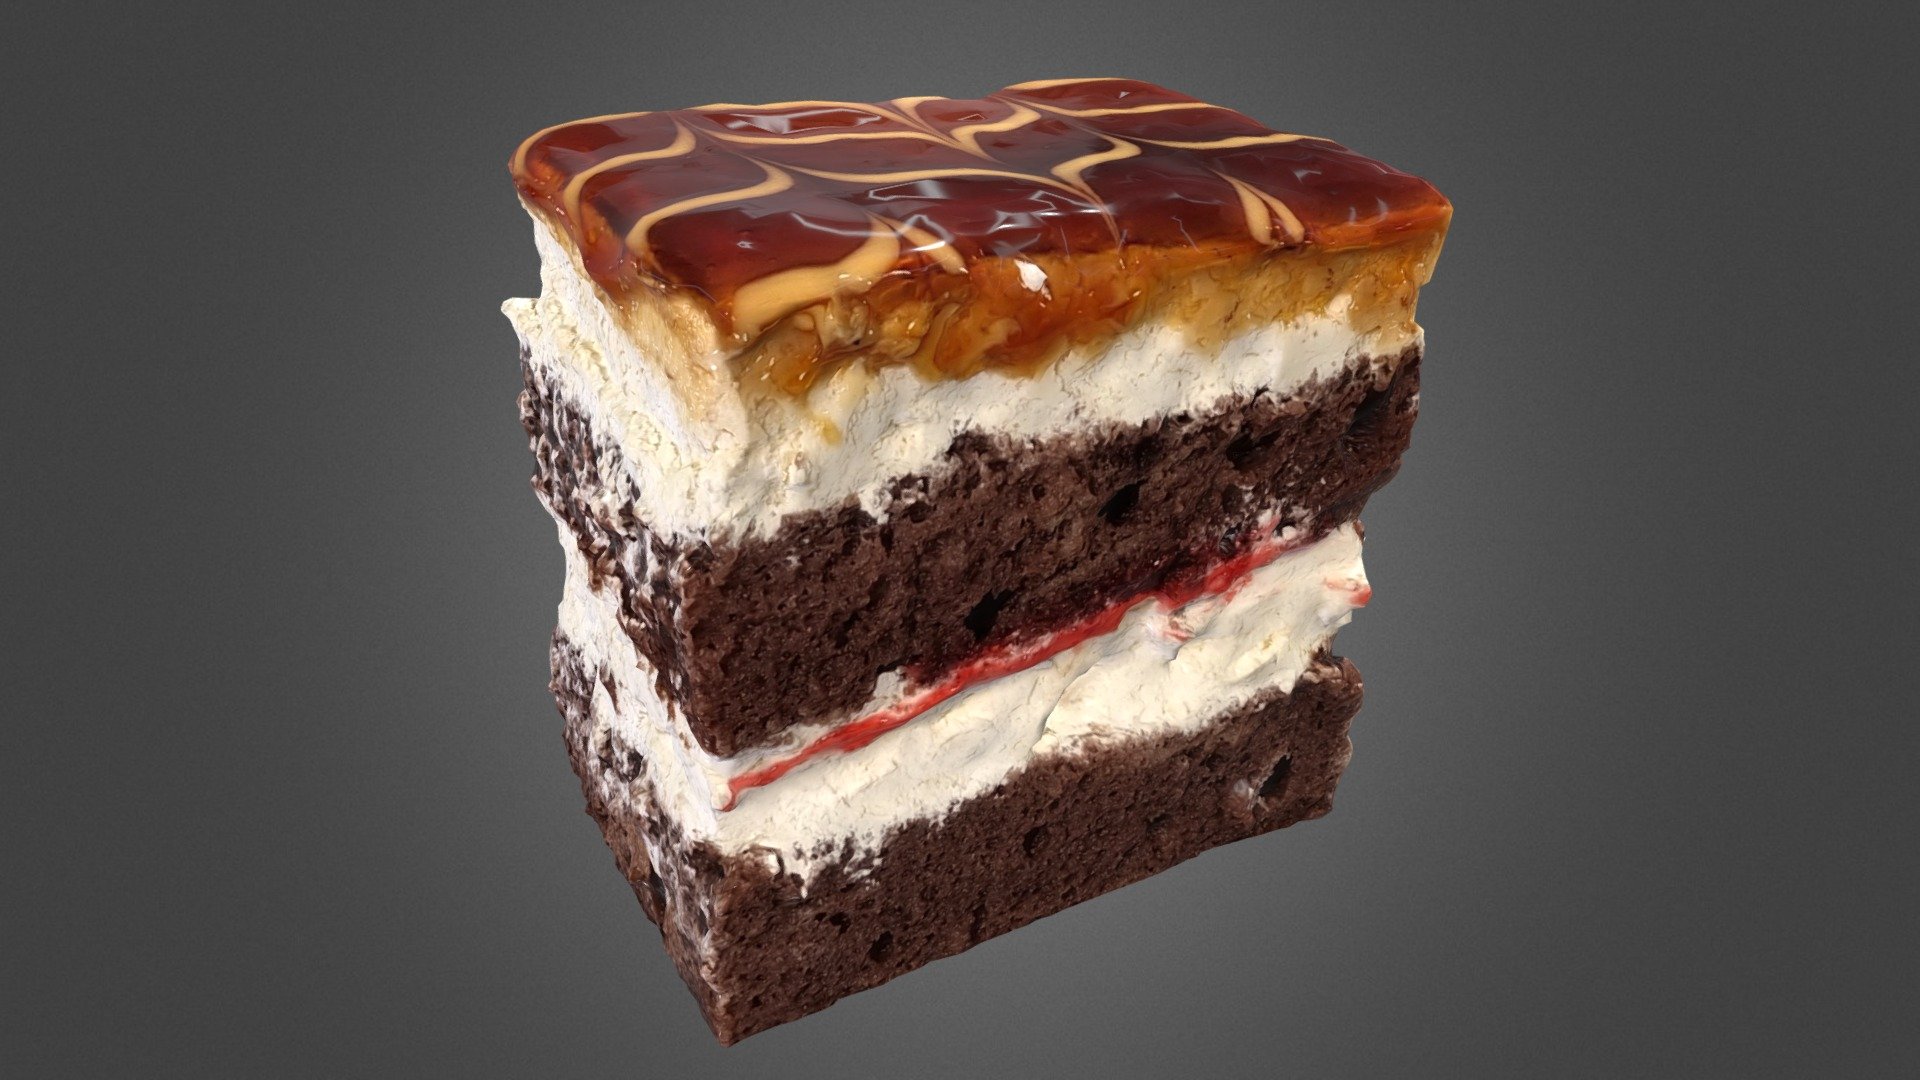 Low poly photogrammetry of a slice of cake with caramel topping 3d model